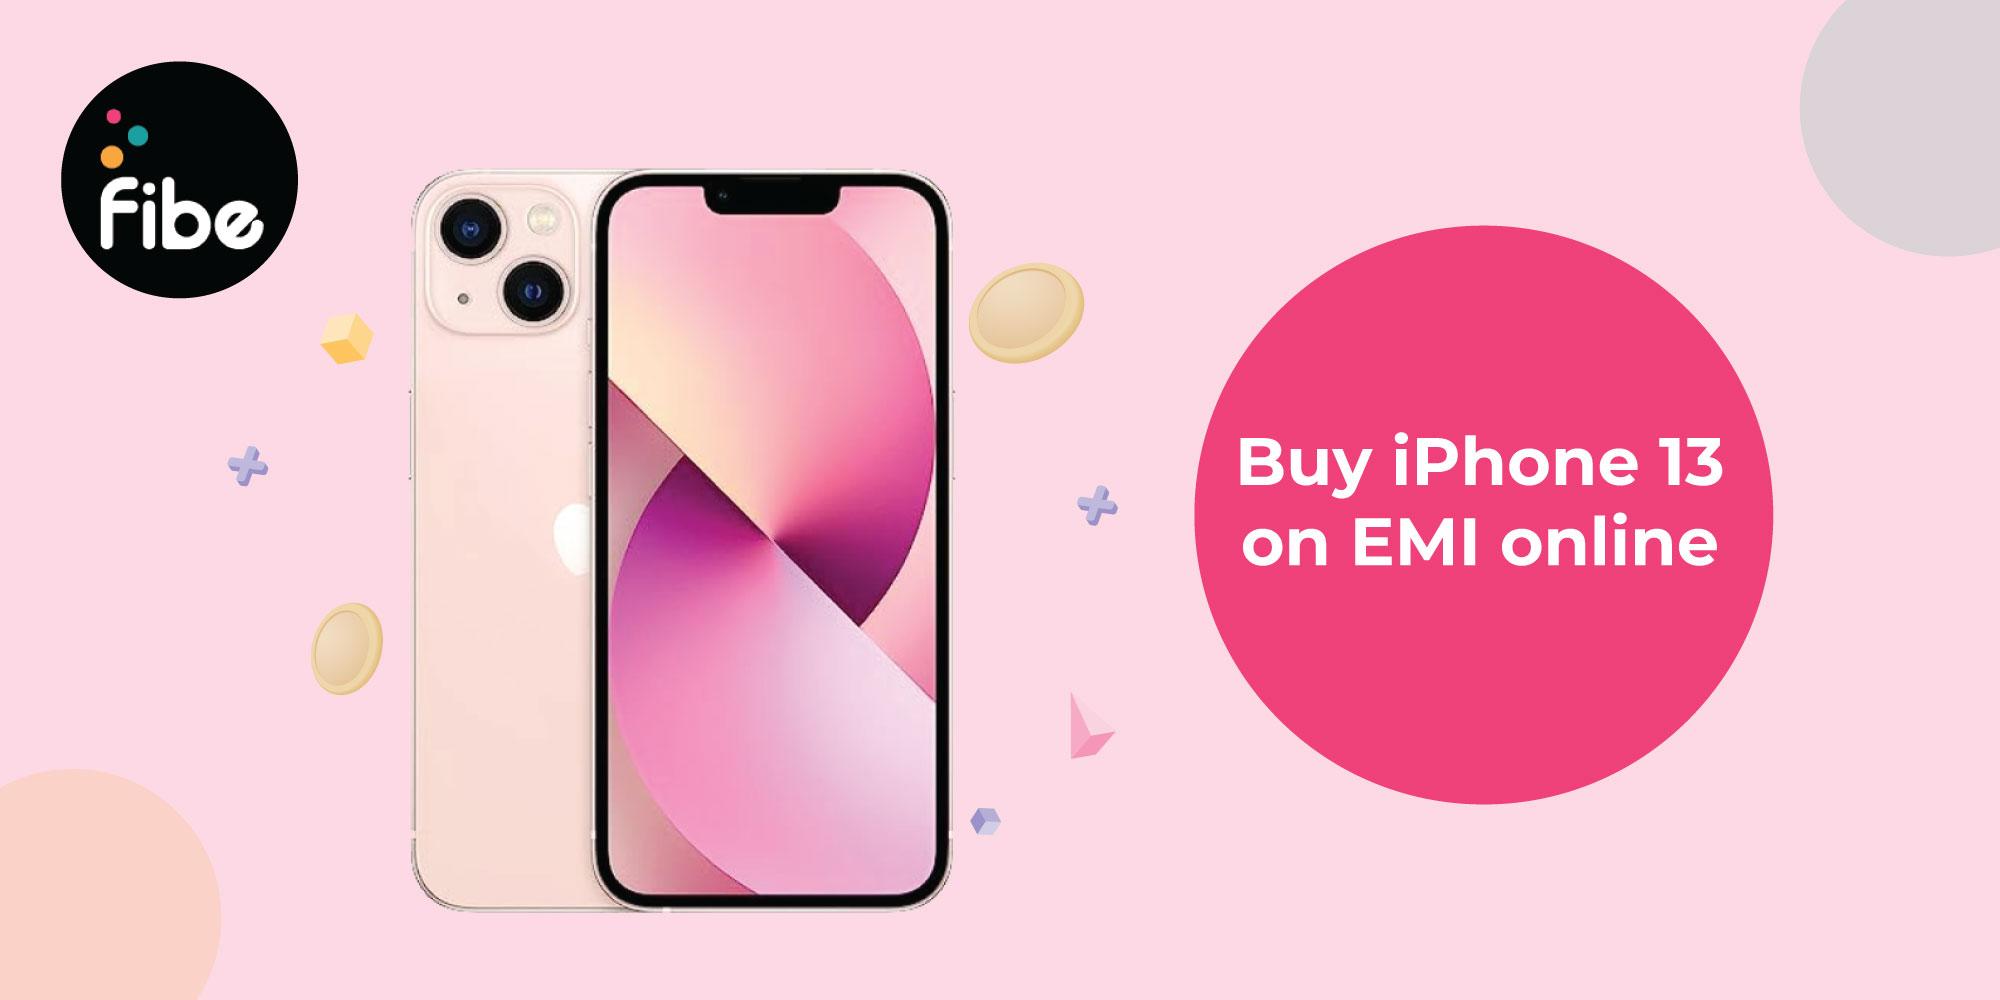 Buy an iPhone 13 on EMI with a Credit Card: Everything You Need to Know